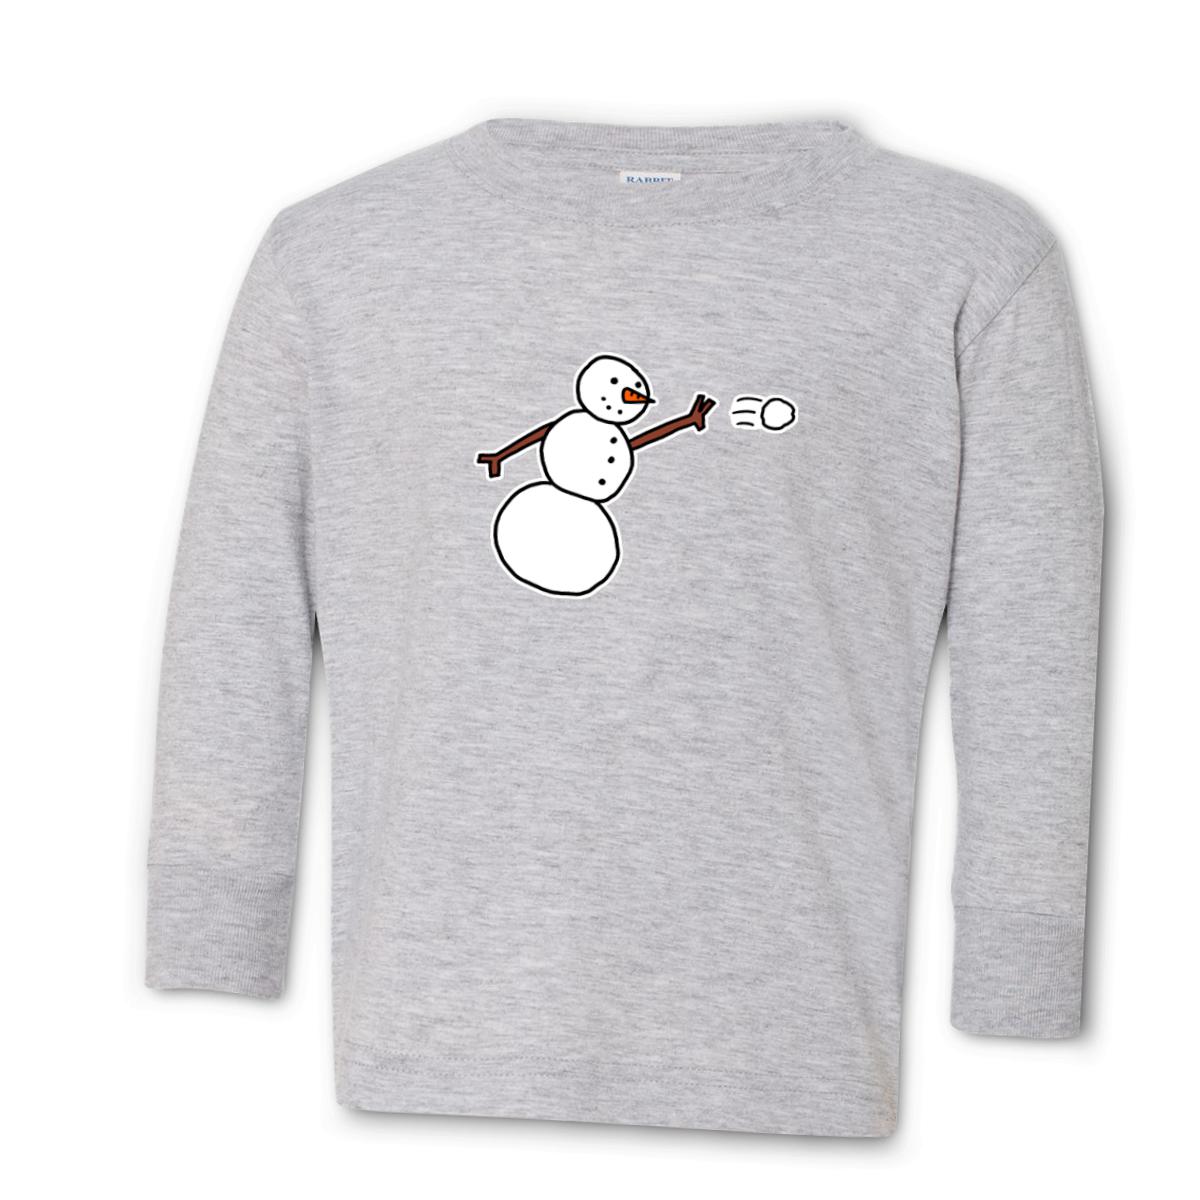 Snowman Throwing Snowball Toddler Long Sleeve Tee 4T heather